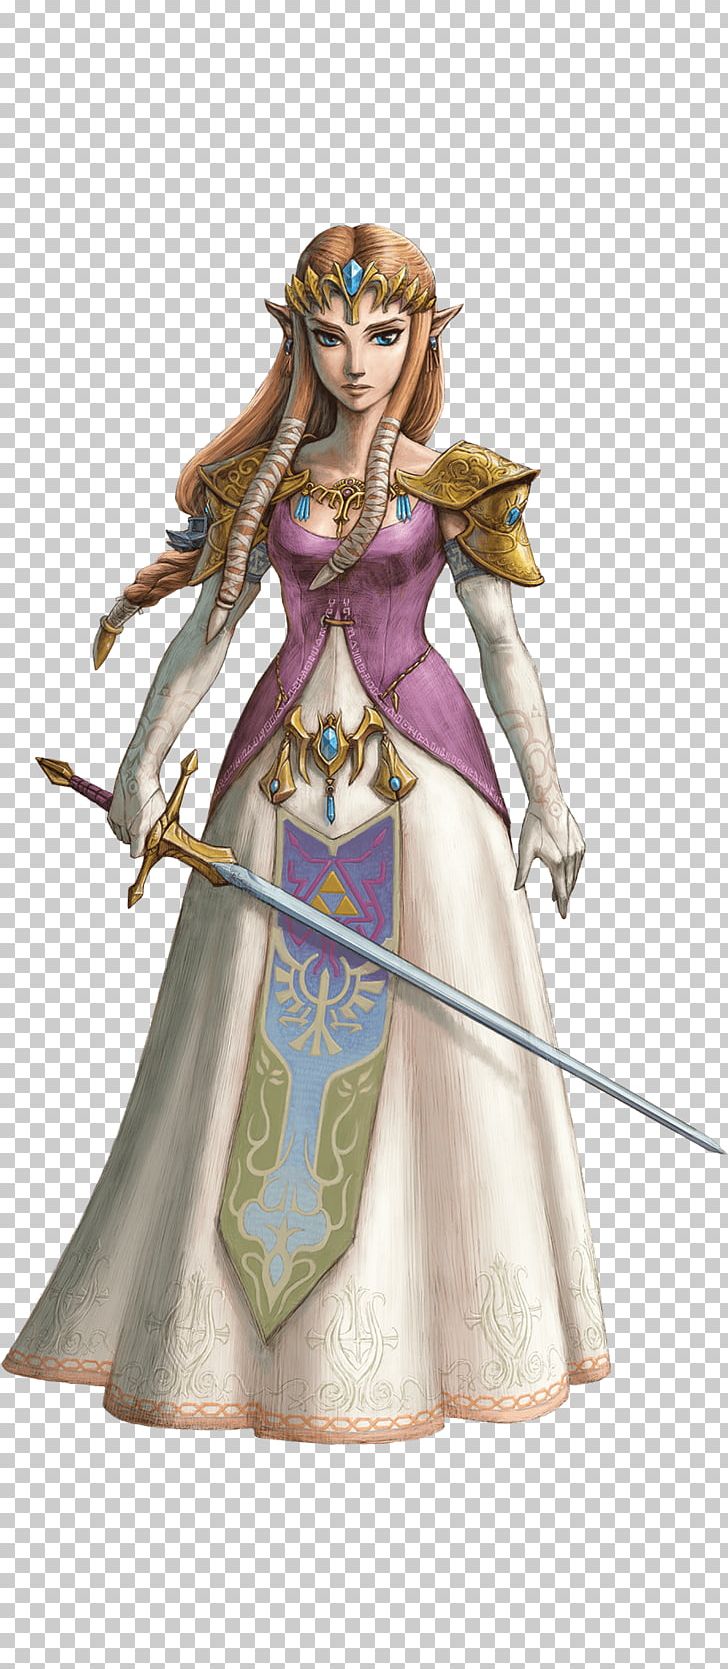 The Legend Of Zelda: Twilight Princess HD Princess Zelda Link The Legend Of Zelda: Breath Of The Wild PNG, Clipart, Angel, Anime, Costume, Costume Design, Fictional Character Free PNG Download